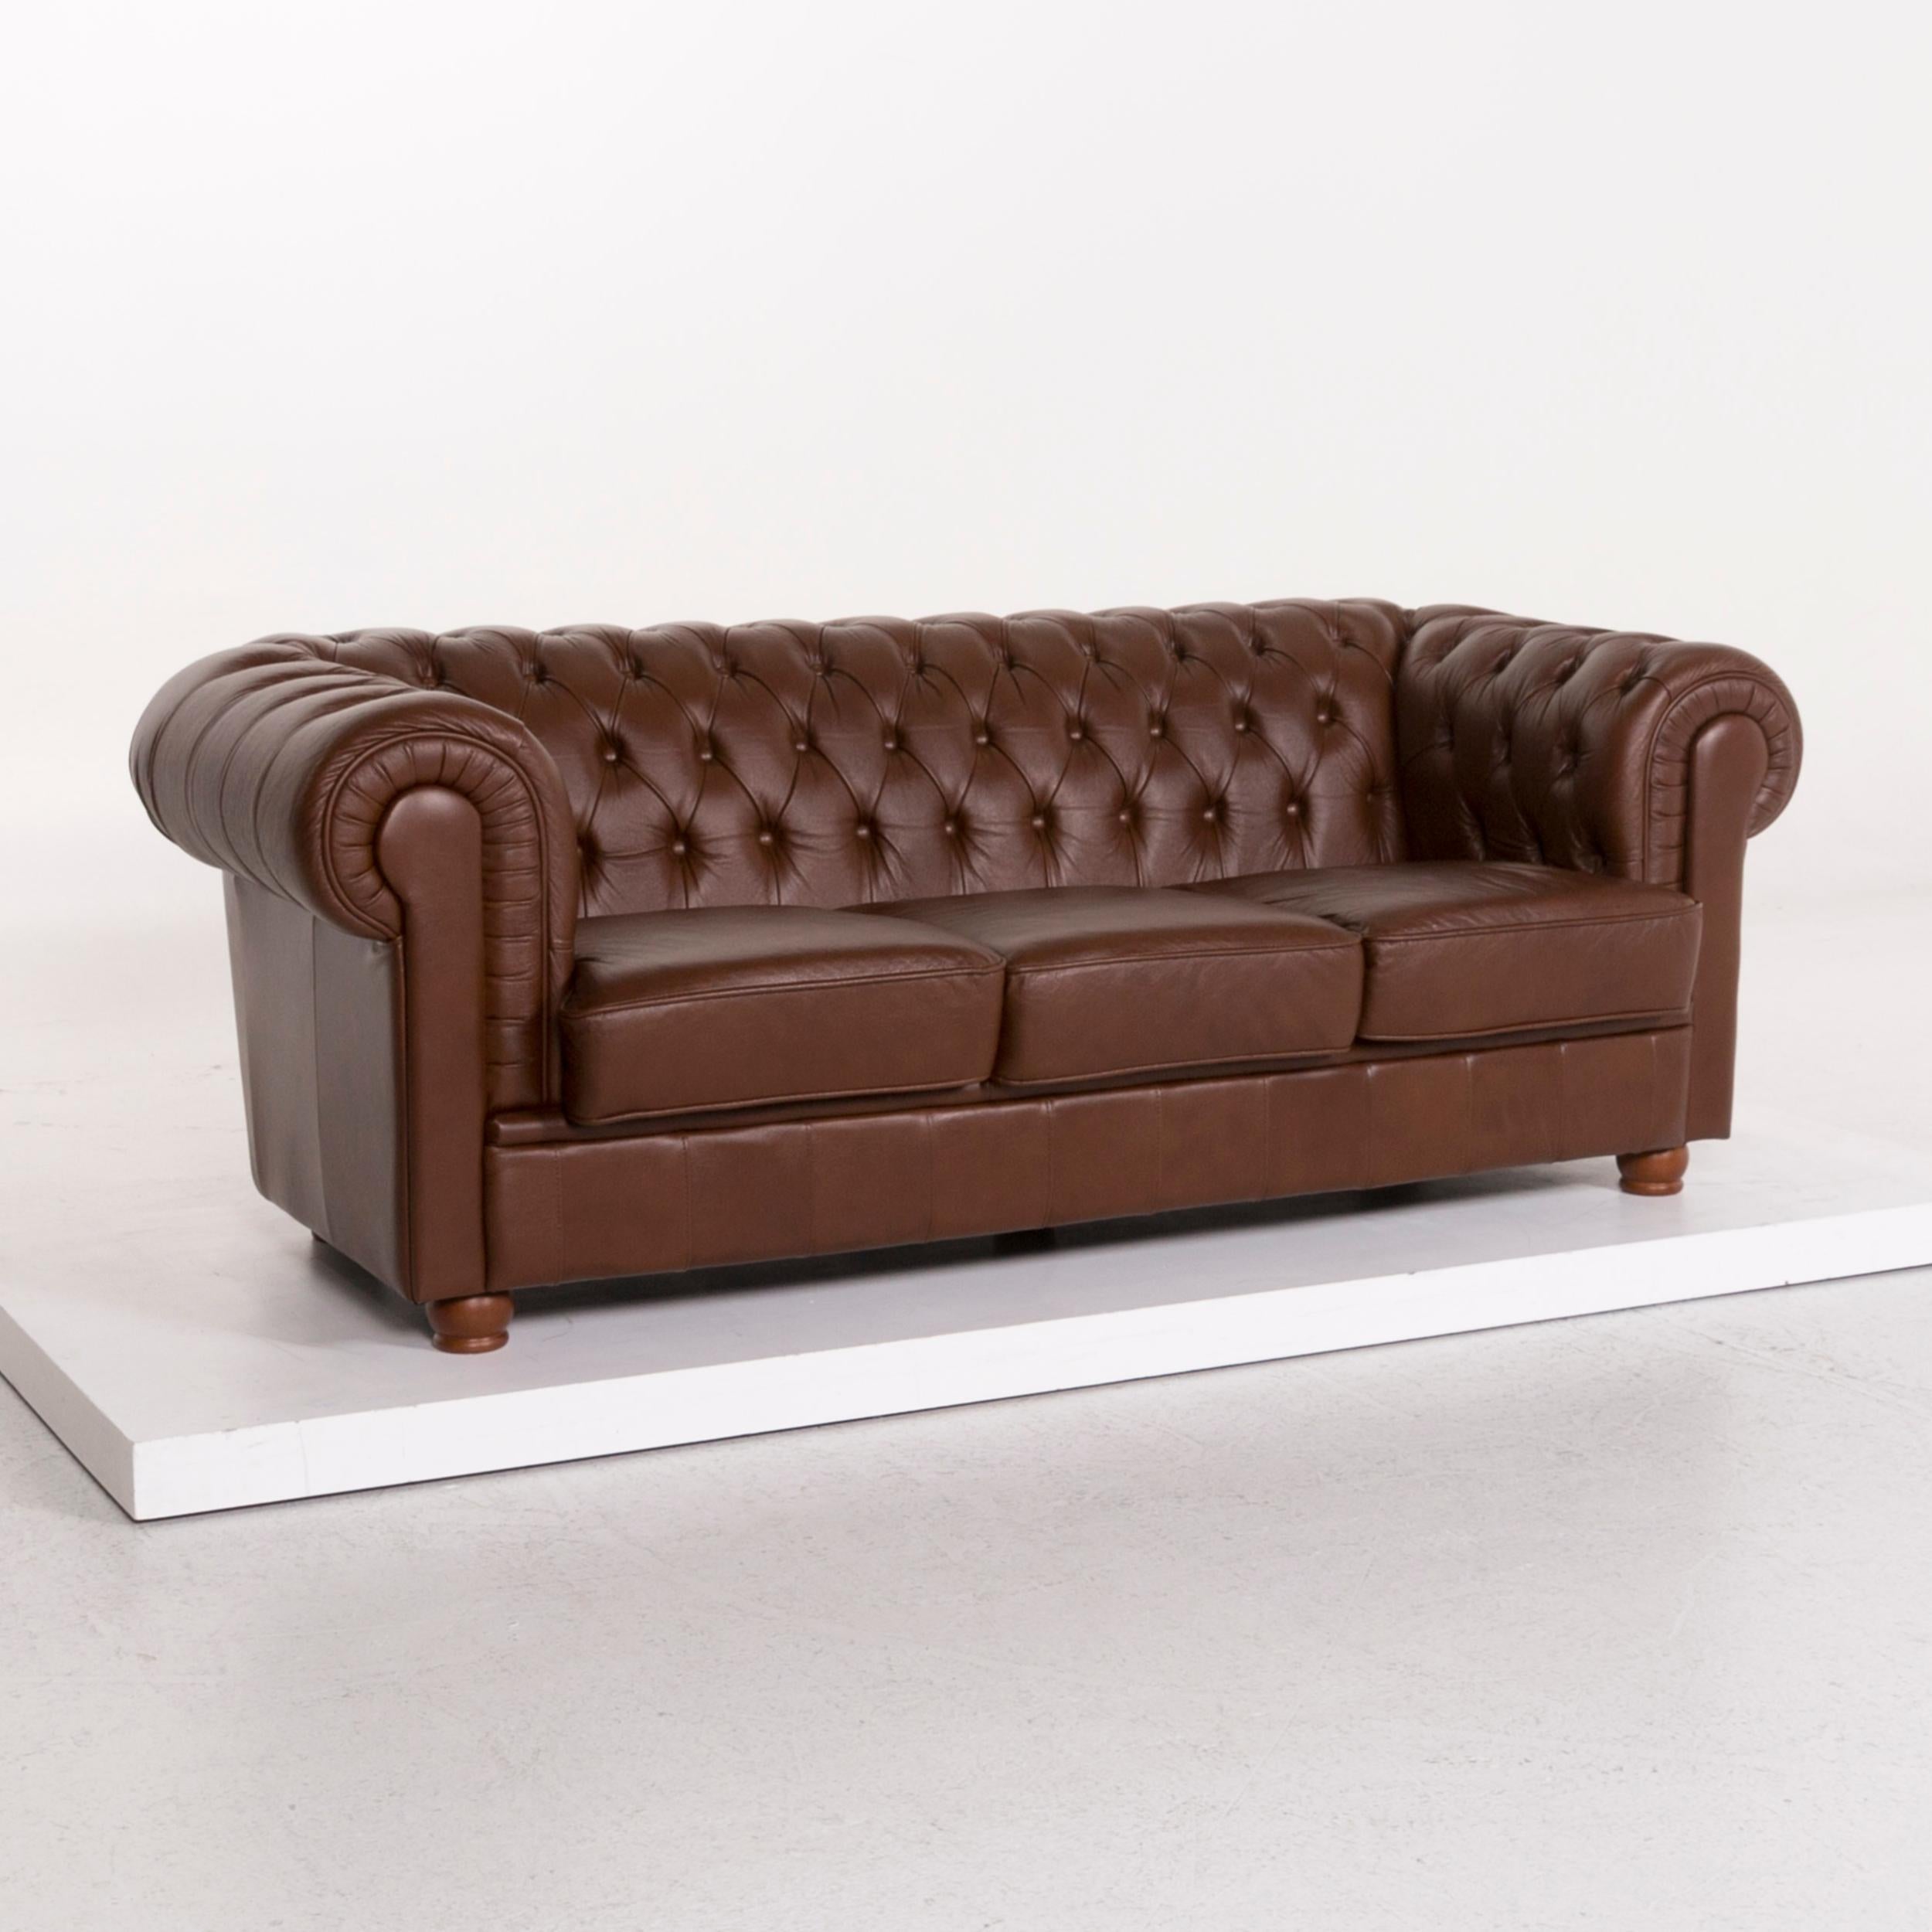 Contemporary Chesterfield Leather Sofa Brown Three-Seat